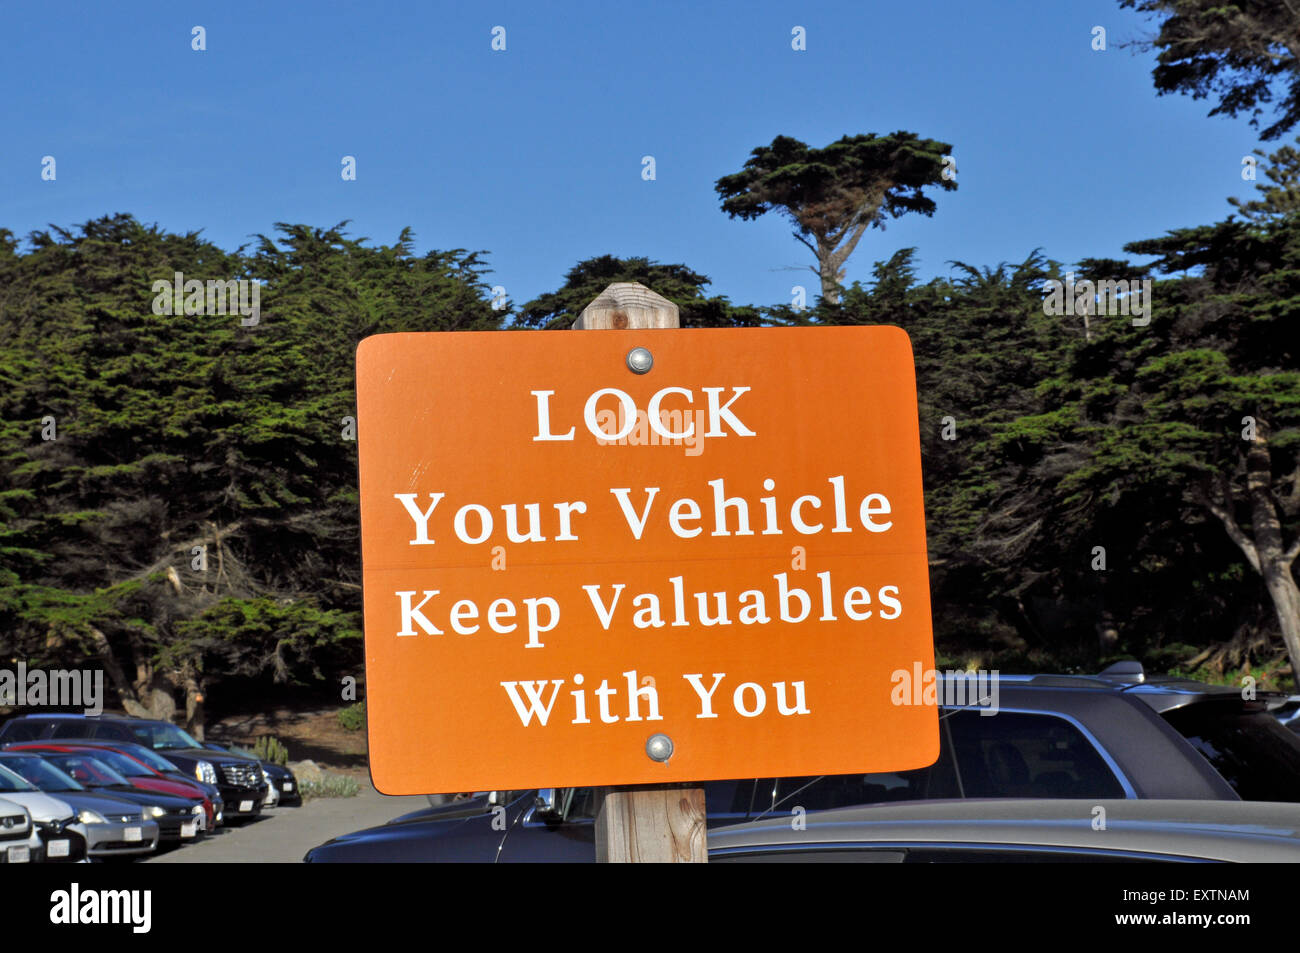 warning sign to lock your vehicles keep valuables with you, California parking lot Stock Photo